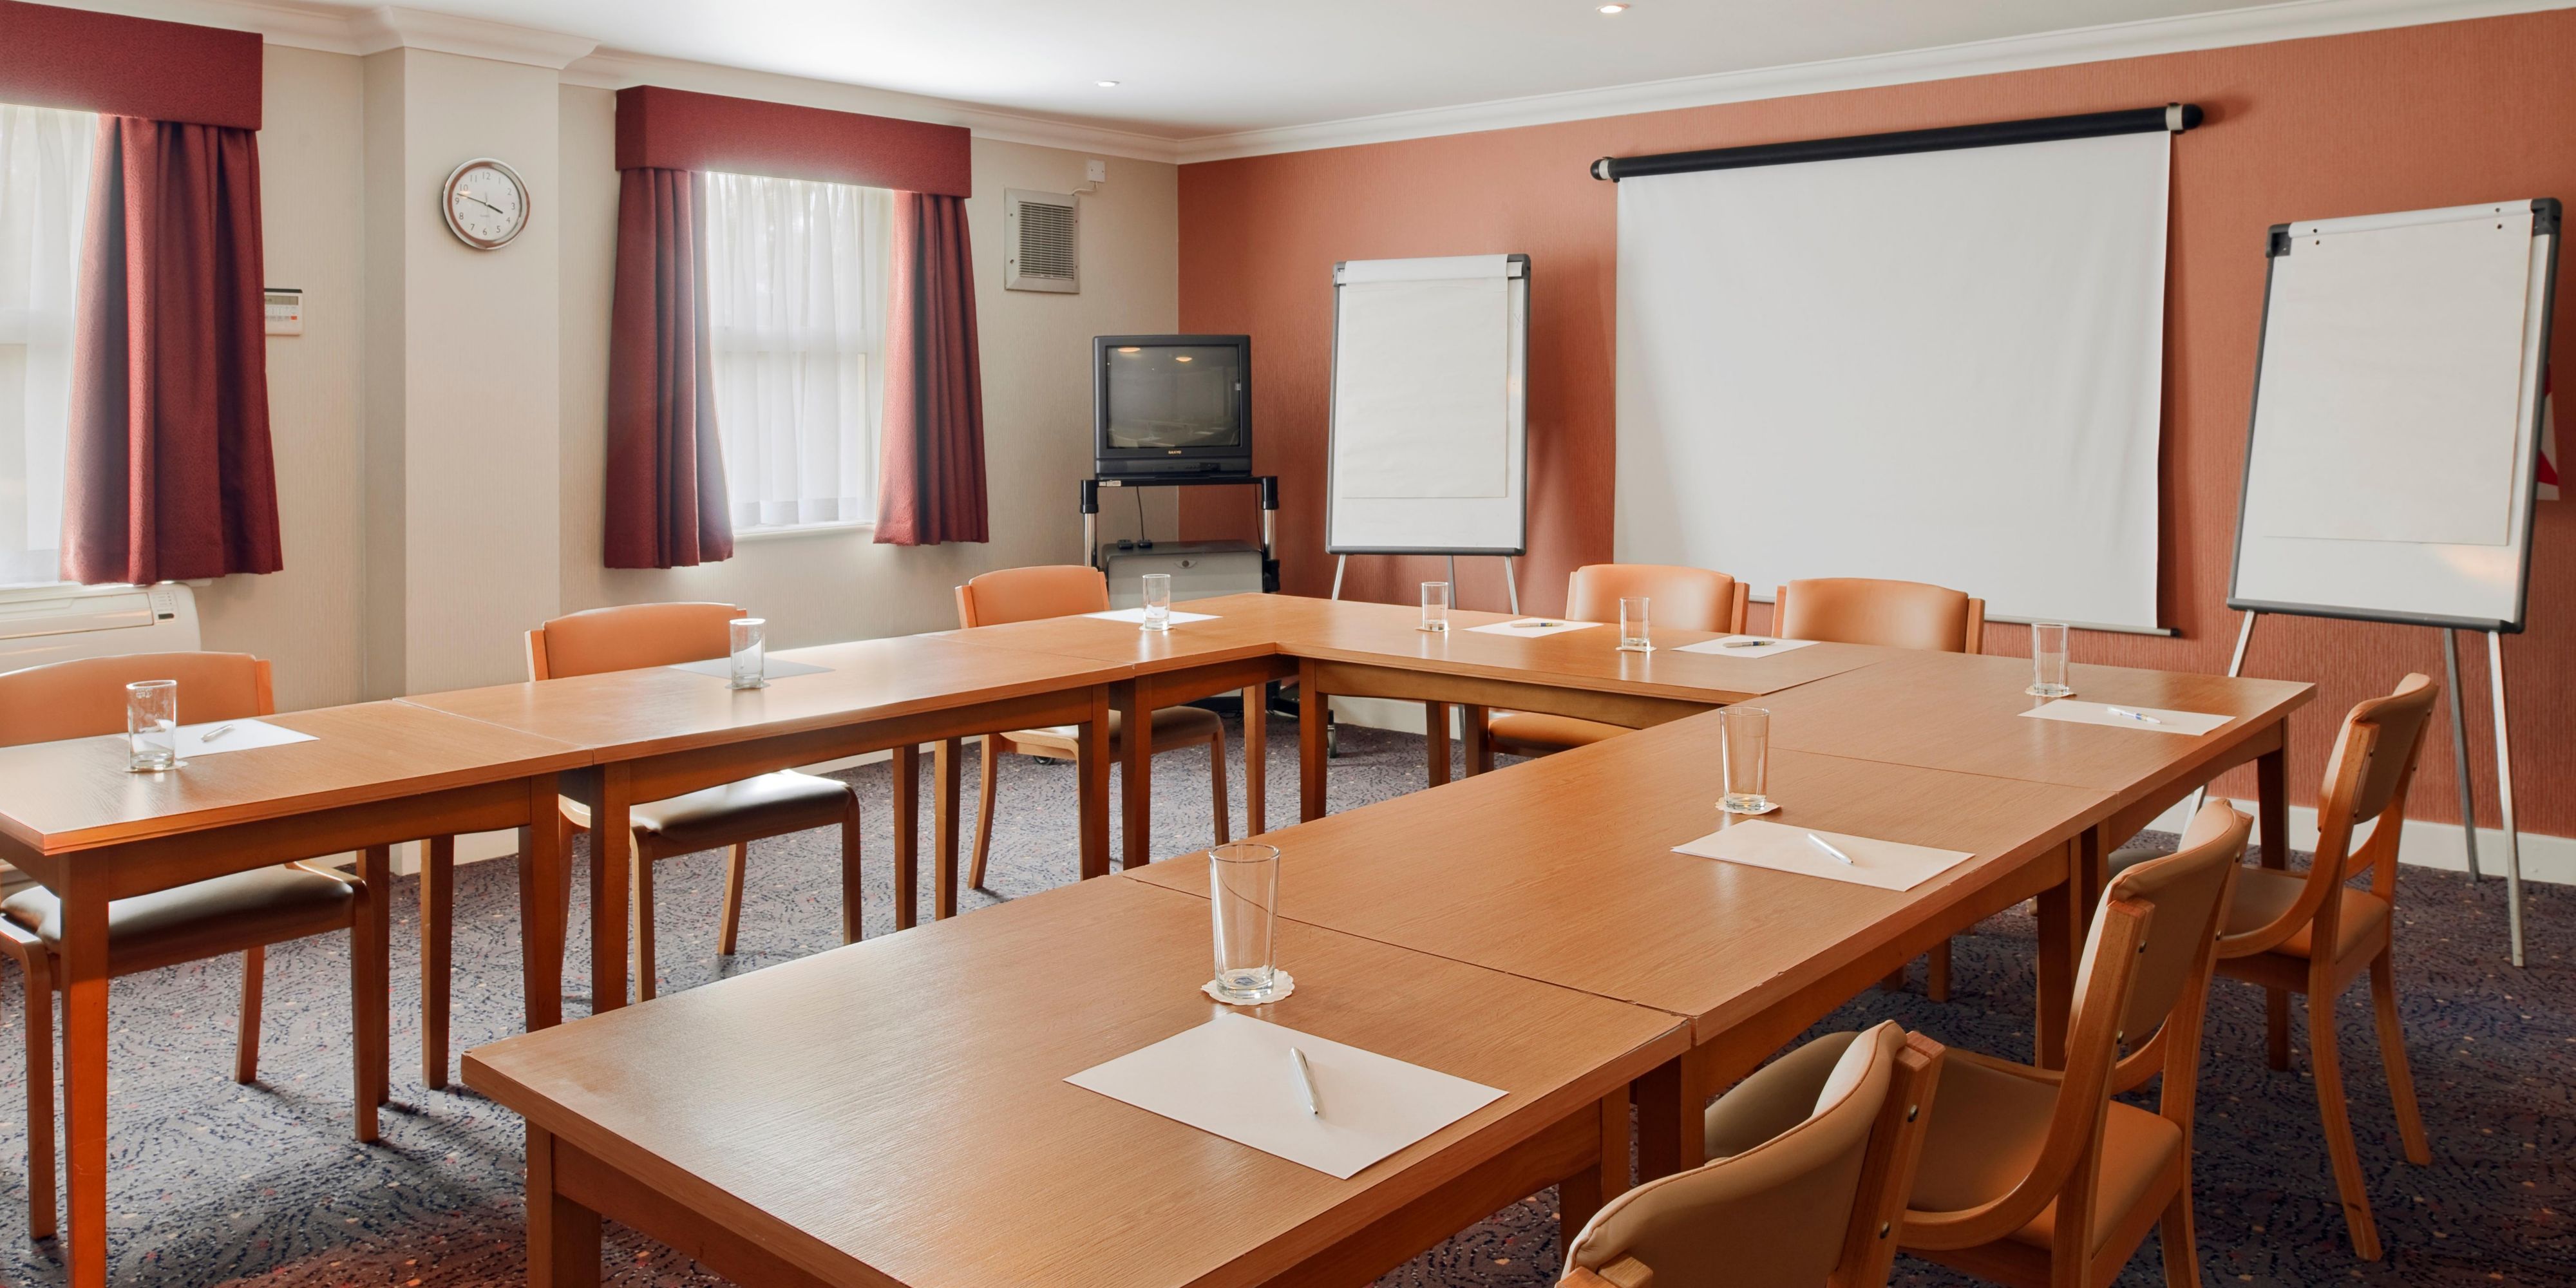 Our stylish and modern meeting facility is a smart and convenient choice for business travellers on the move. This contemporary meeting room can cater for up to 25 people theatre style and up to 20 people boardroom style. Complimentary car parking available